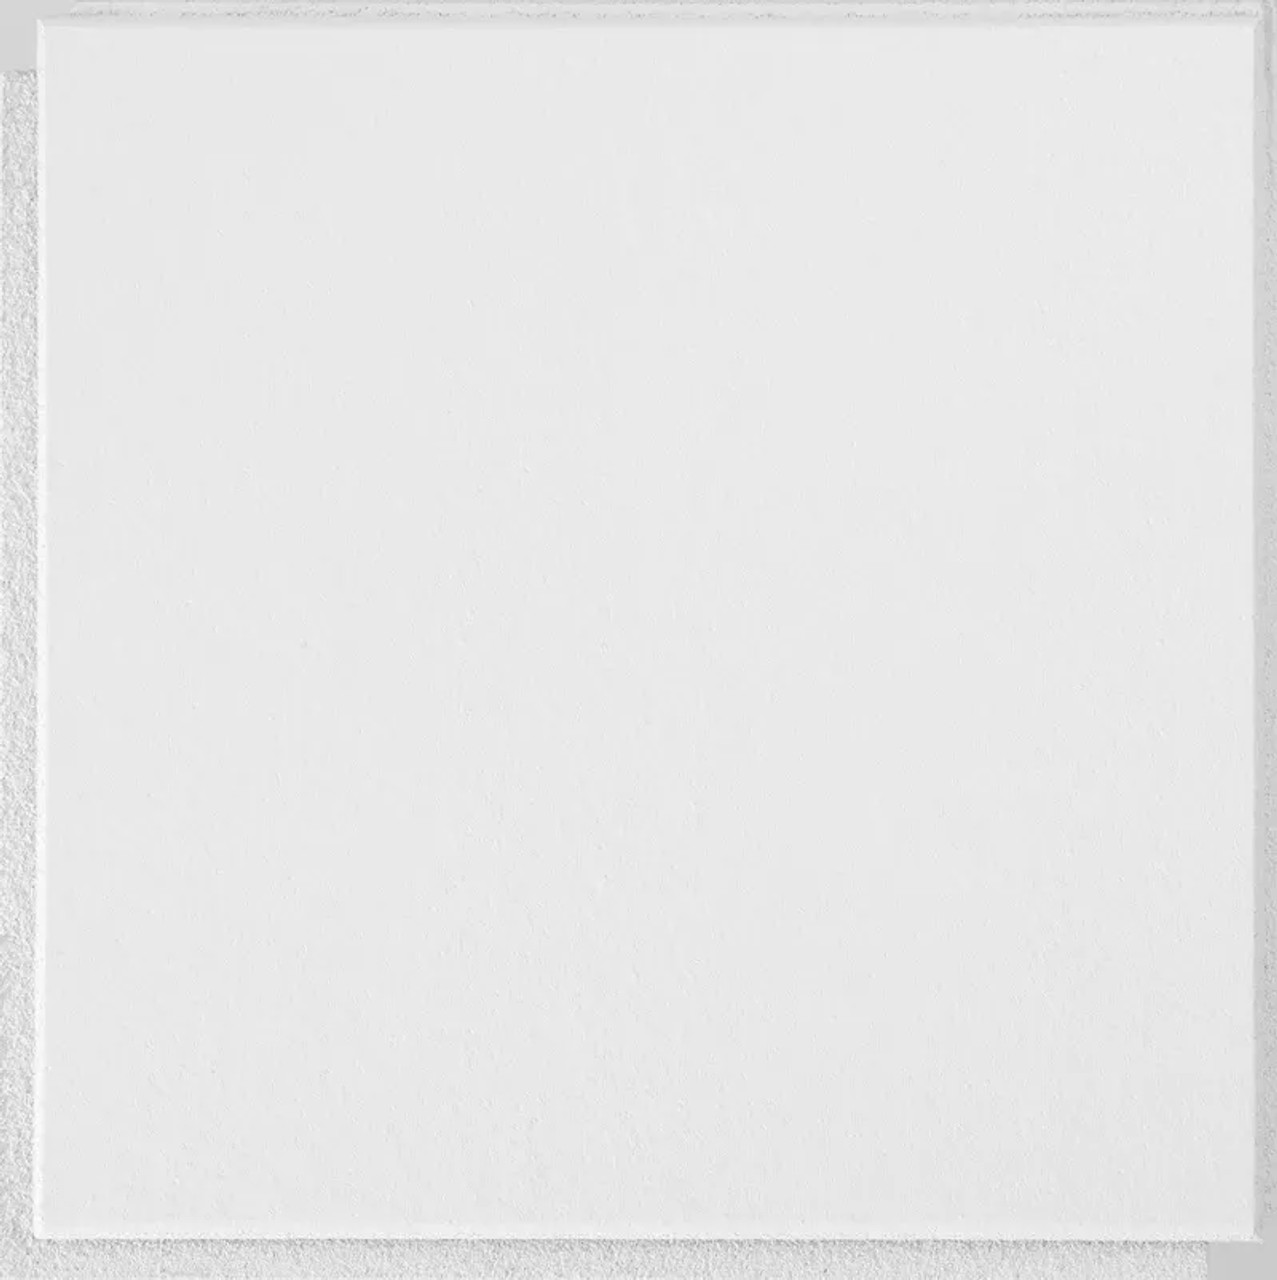 Armstrong 231 Washable White Ceiling Tile panels measure 12x12 inches and feature a Tongue & Groove design for easy installation. The washable white finish adds a clean look, ensuring durability and easy maintenance. Ideal for various settings, these tiles provide a polished and professional ceiling surface with a bright and spacious feel.